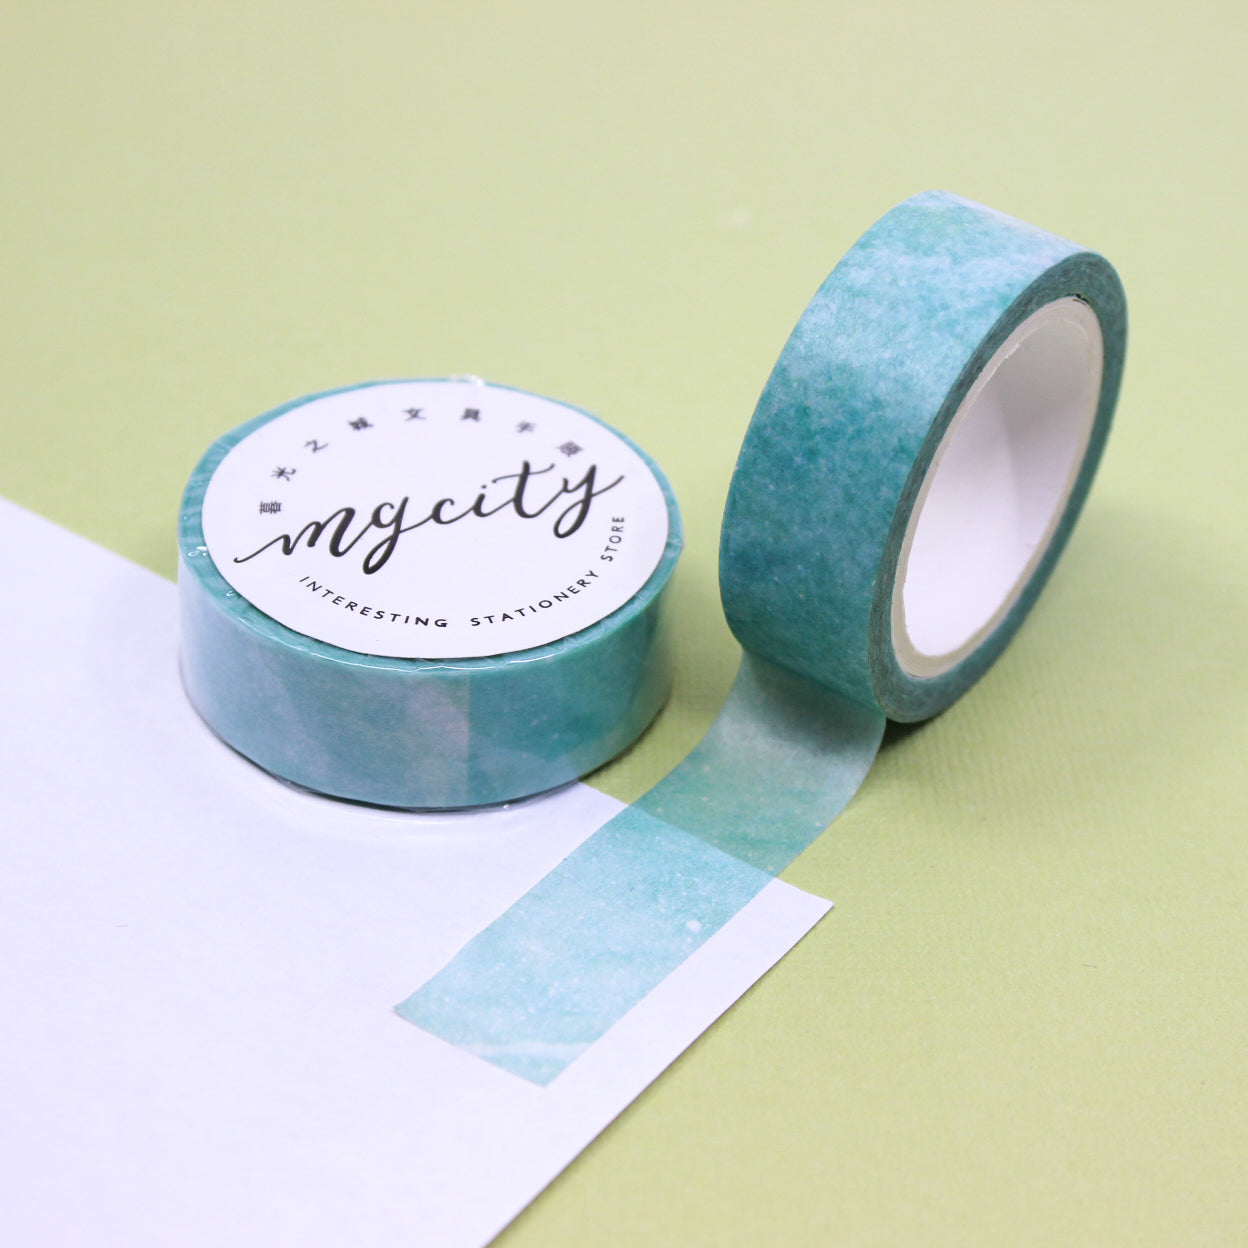 This light green sky watercolor washi tape is the perfect addition to your washi collection. The simplicity of the pattern is perfect for accenting and matching any project's theme while adding a beautiful and interesting pattern. This tape is sold at BBB Supplies Craft Shop.